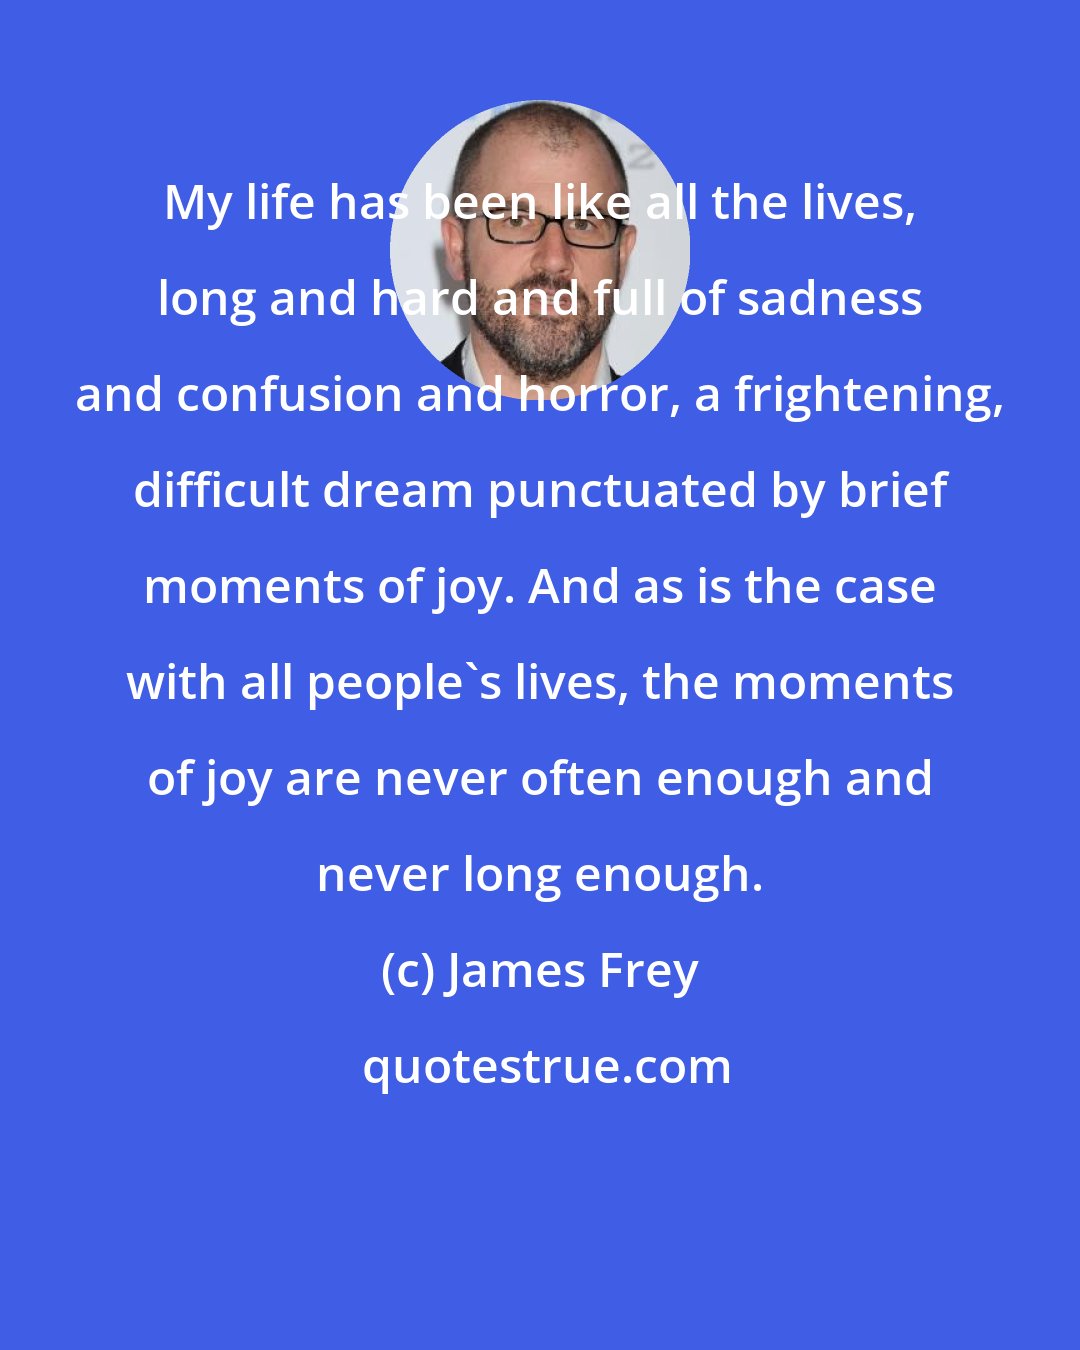 James Frey: My life has been like all the lives, long and hard and full of sadness and confusion and horror, a frightening, difficult dream punctuated by brief moments of joy. And as is the case with all people's lives, the moments of joy are never often enough and never long enough.